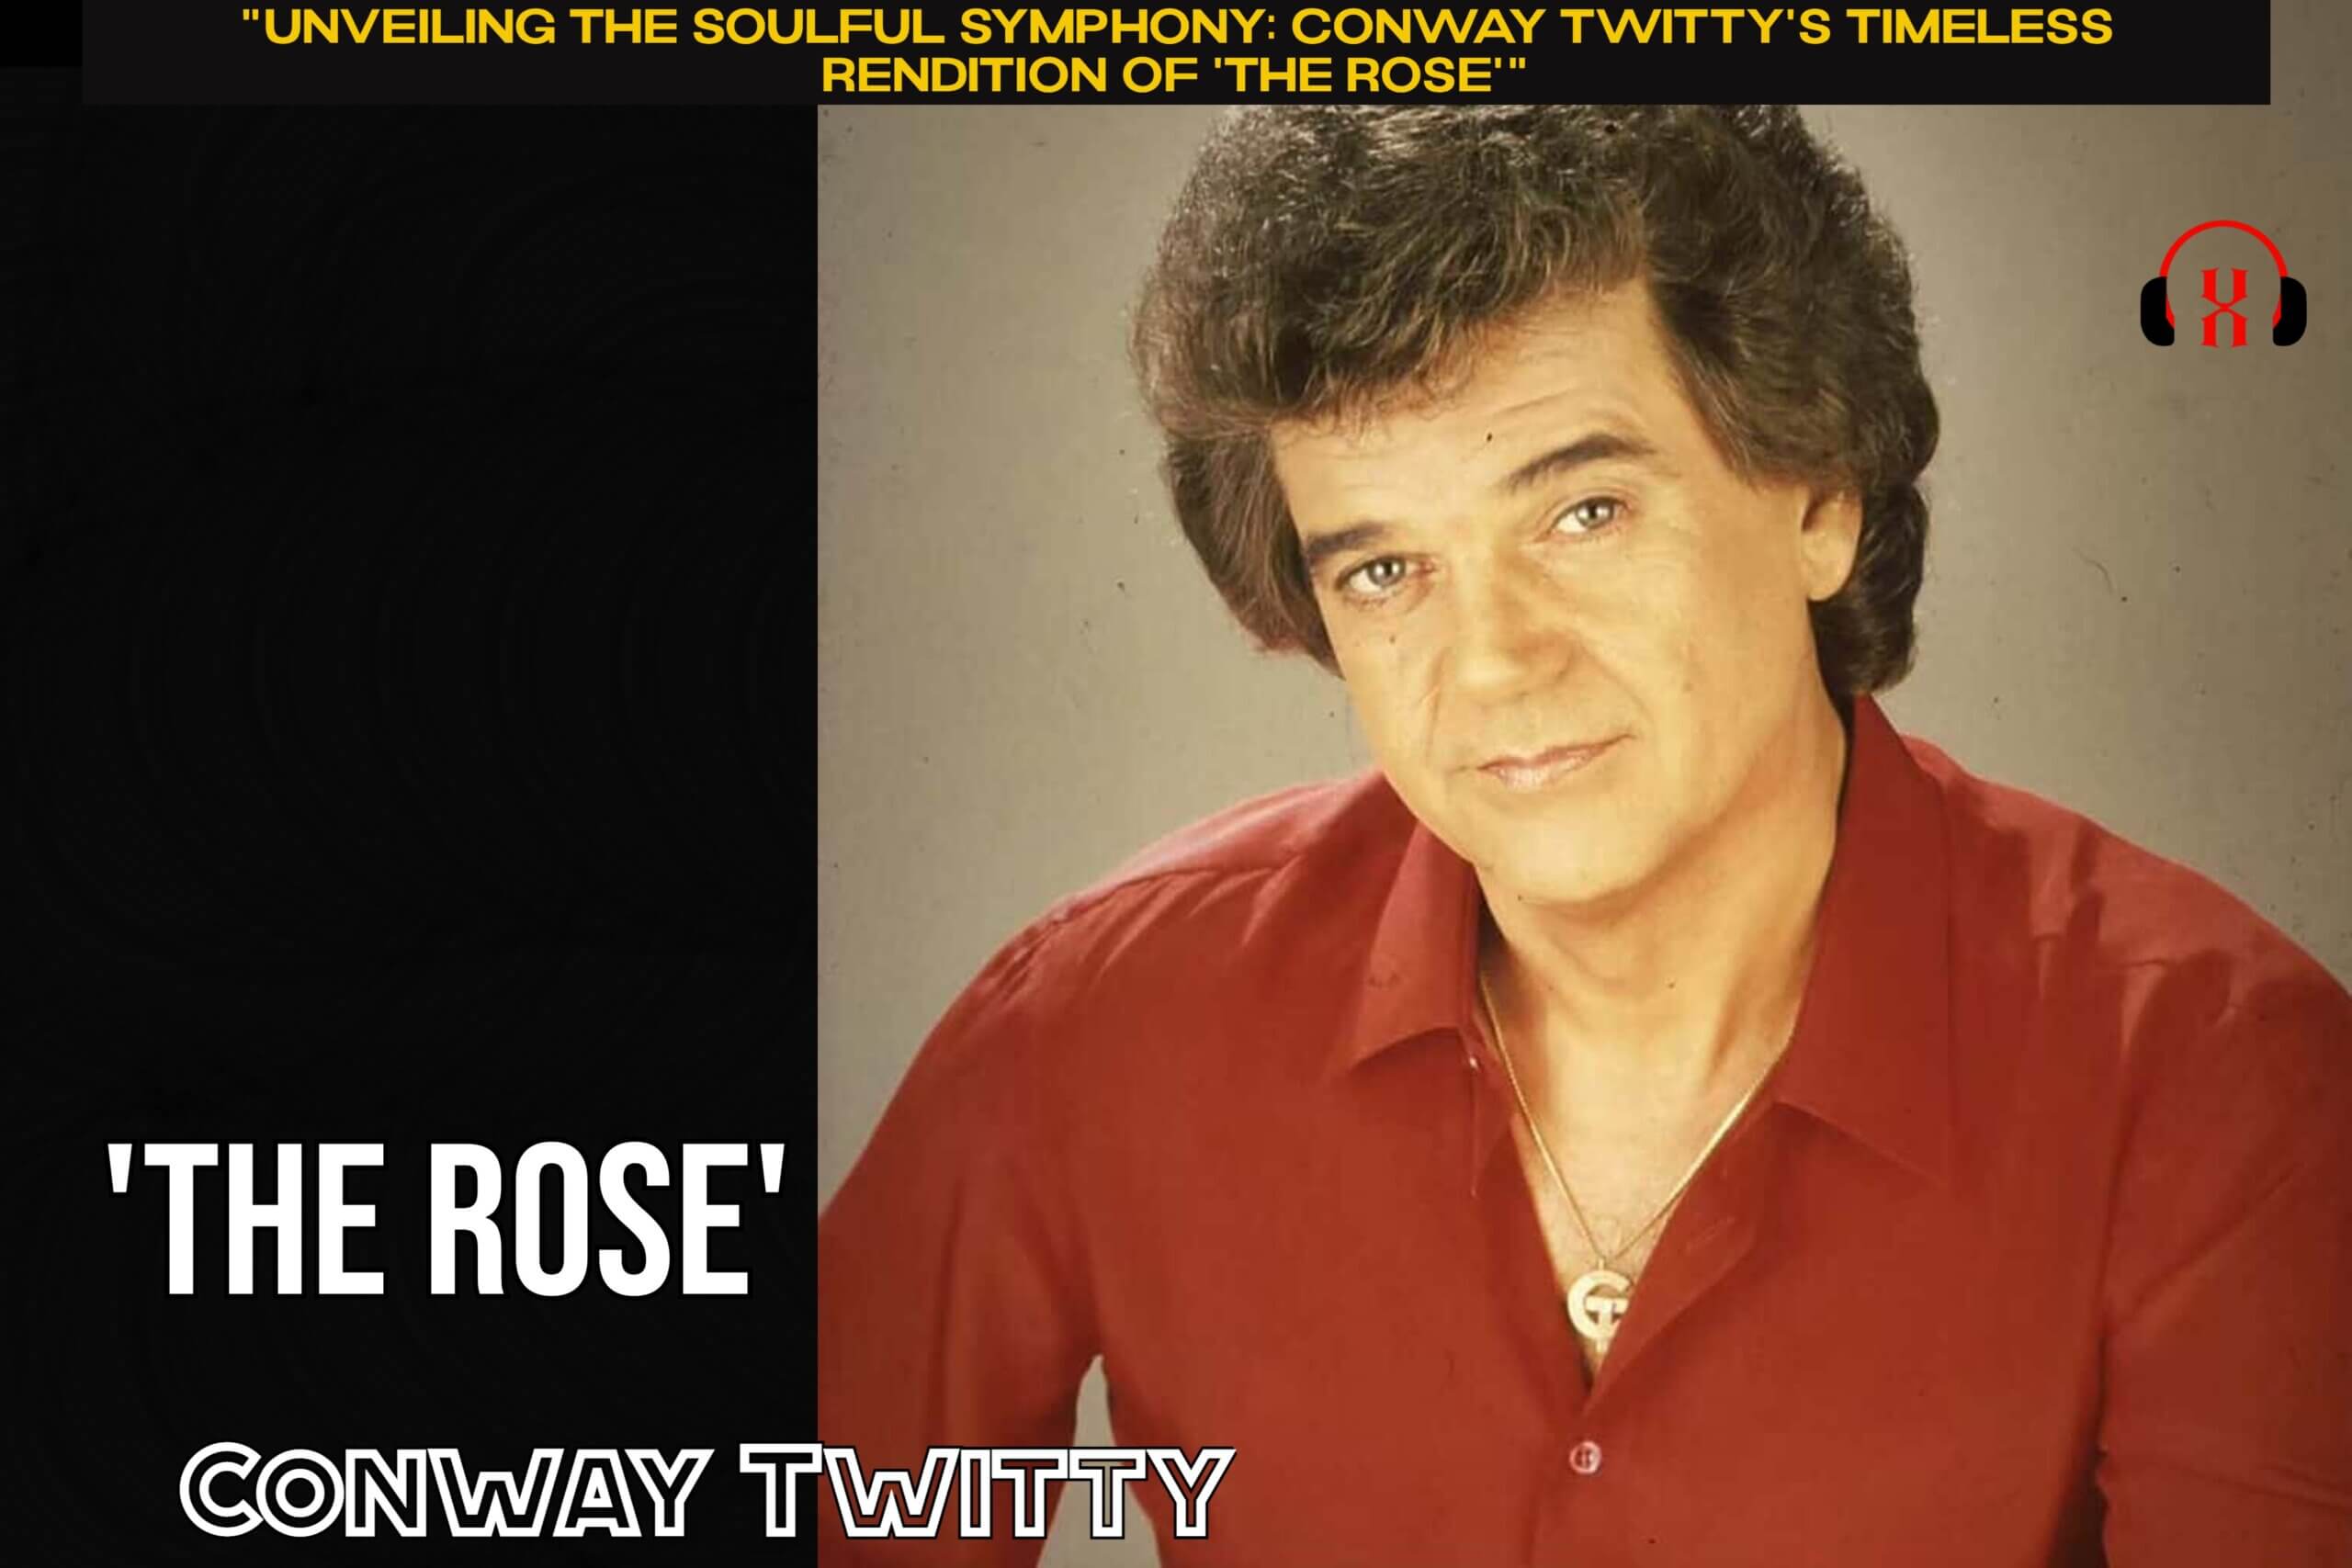 "Unveiling the Soulful Symphony: Conway Twitty's Timeless Rendition of 'The Rose'"